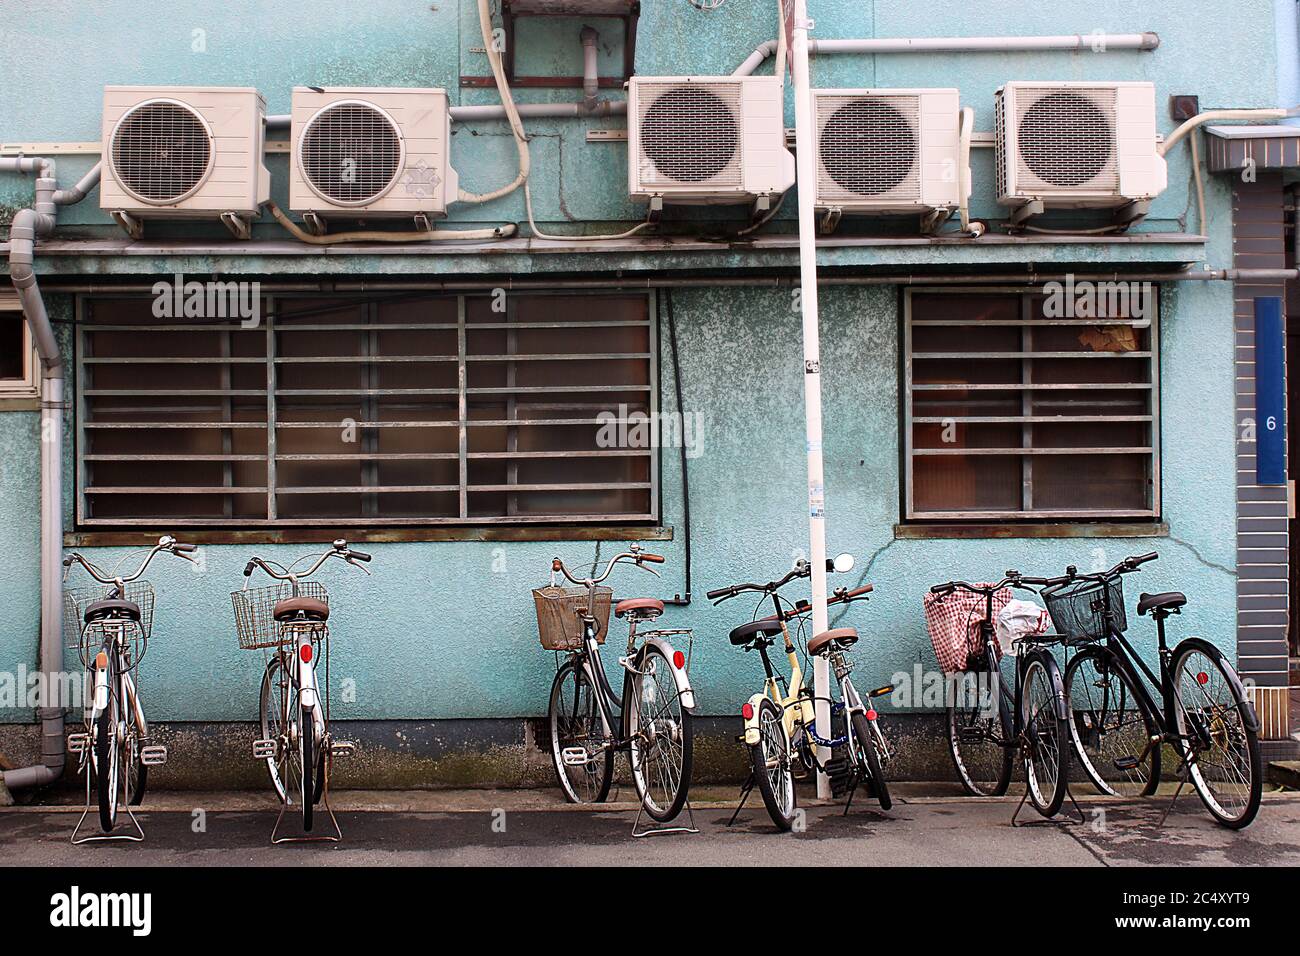 Bicycles parked in front of turqoise wall with ventilation in Japan. Stock Photo